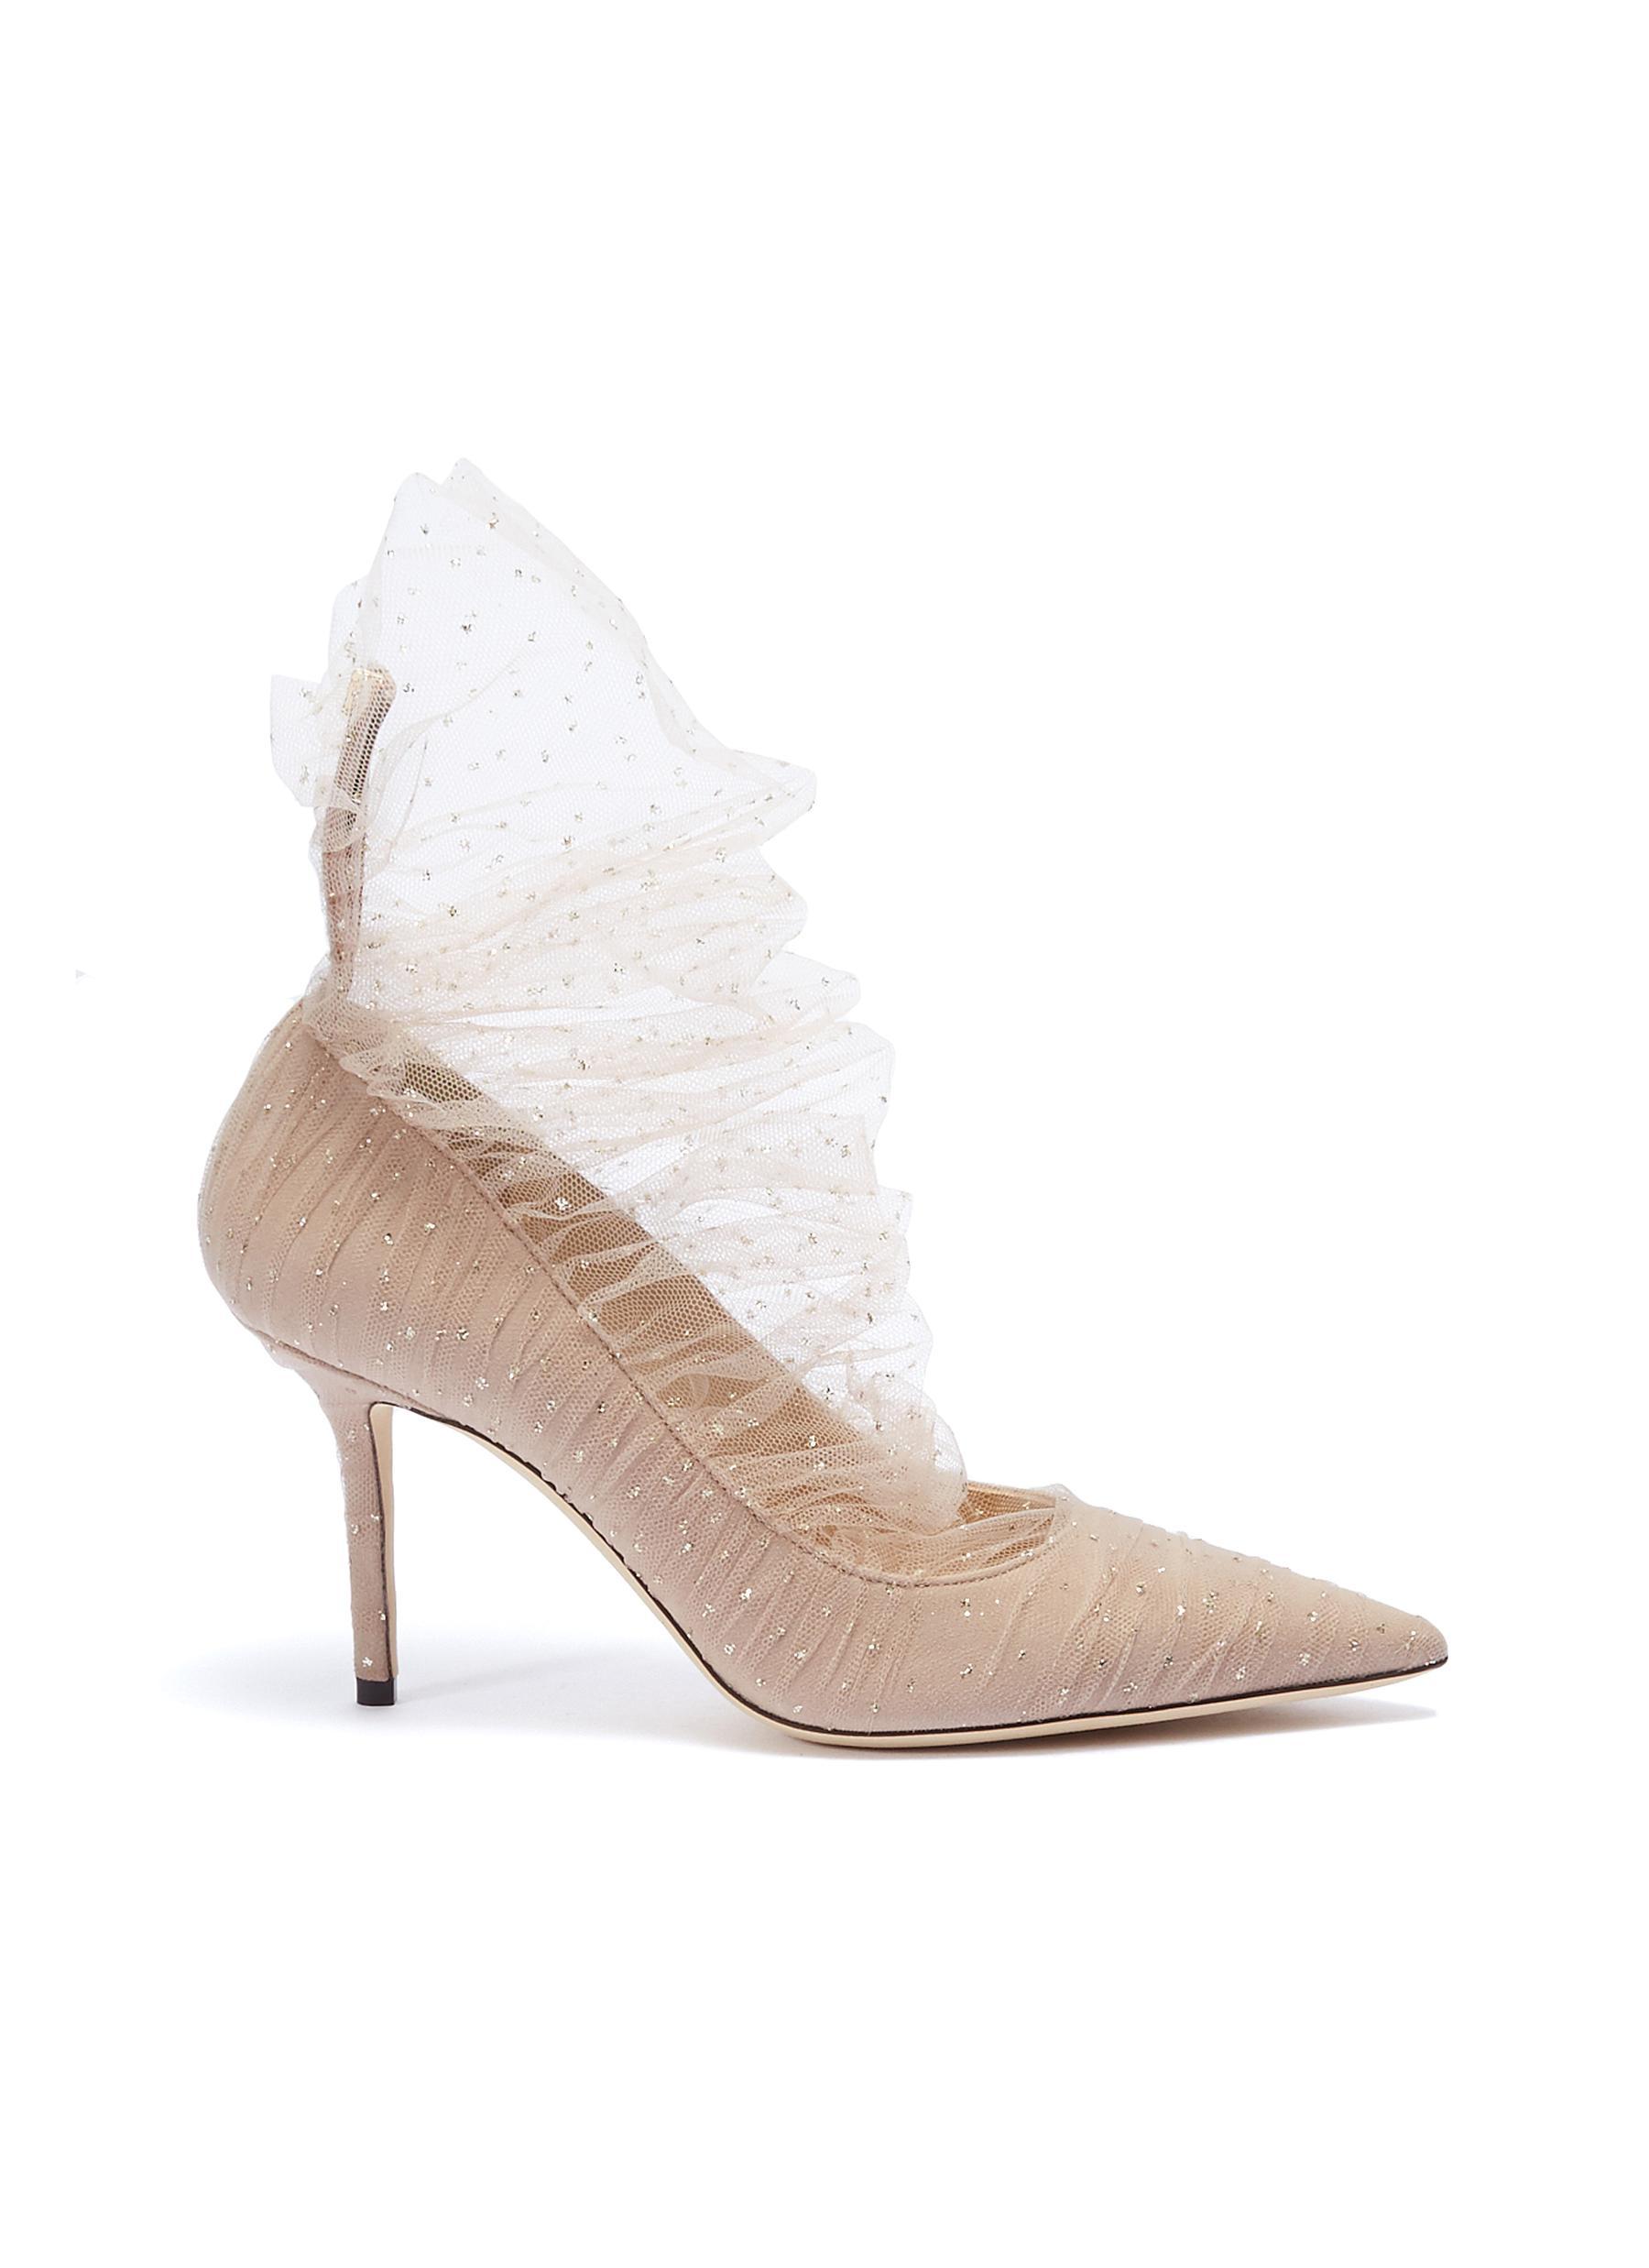 Jimmy Choo 'lavish 85' Glitter Tulle Overlay Suede Pumps in 